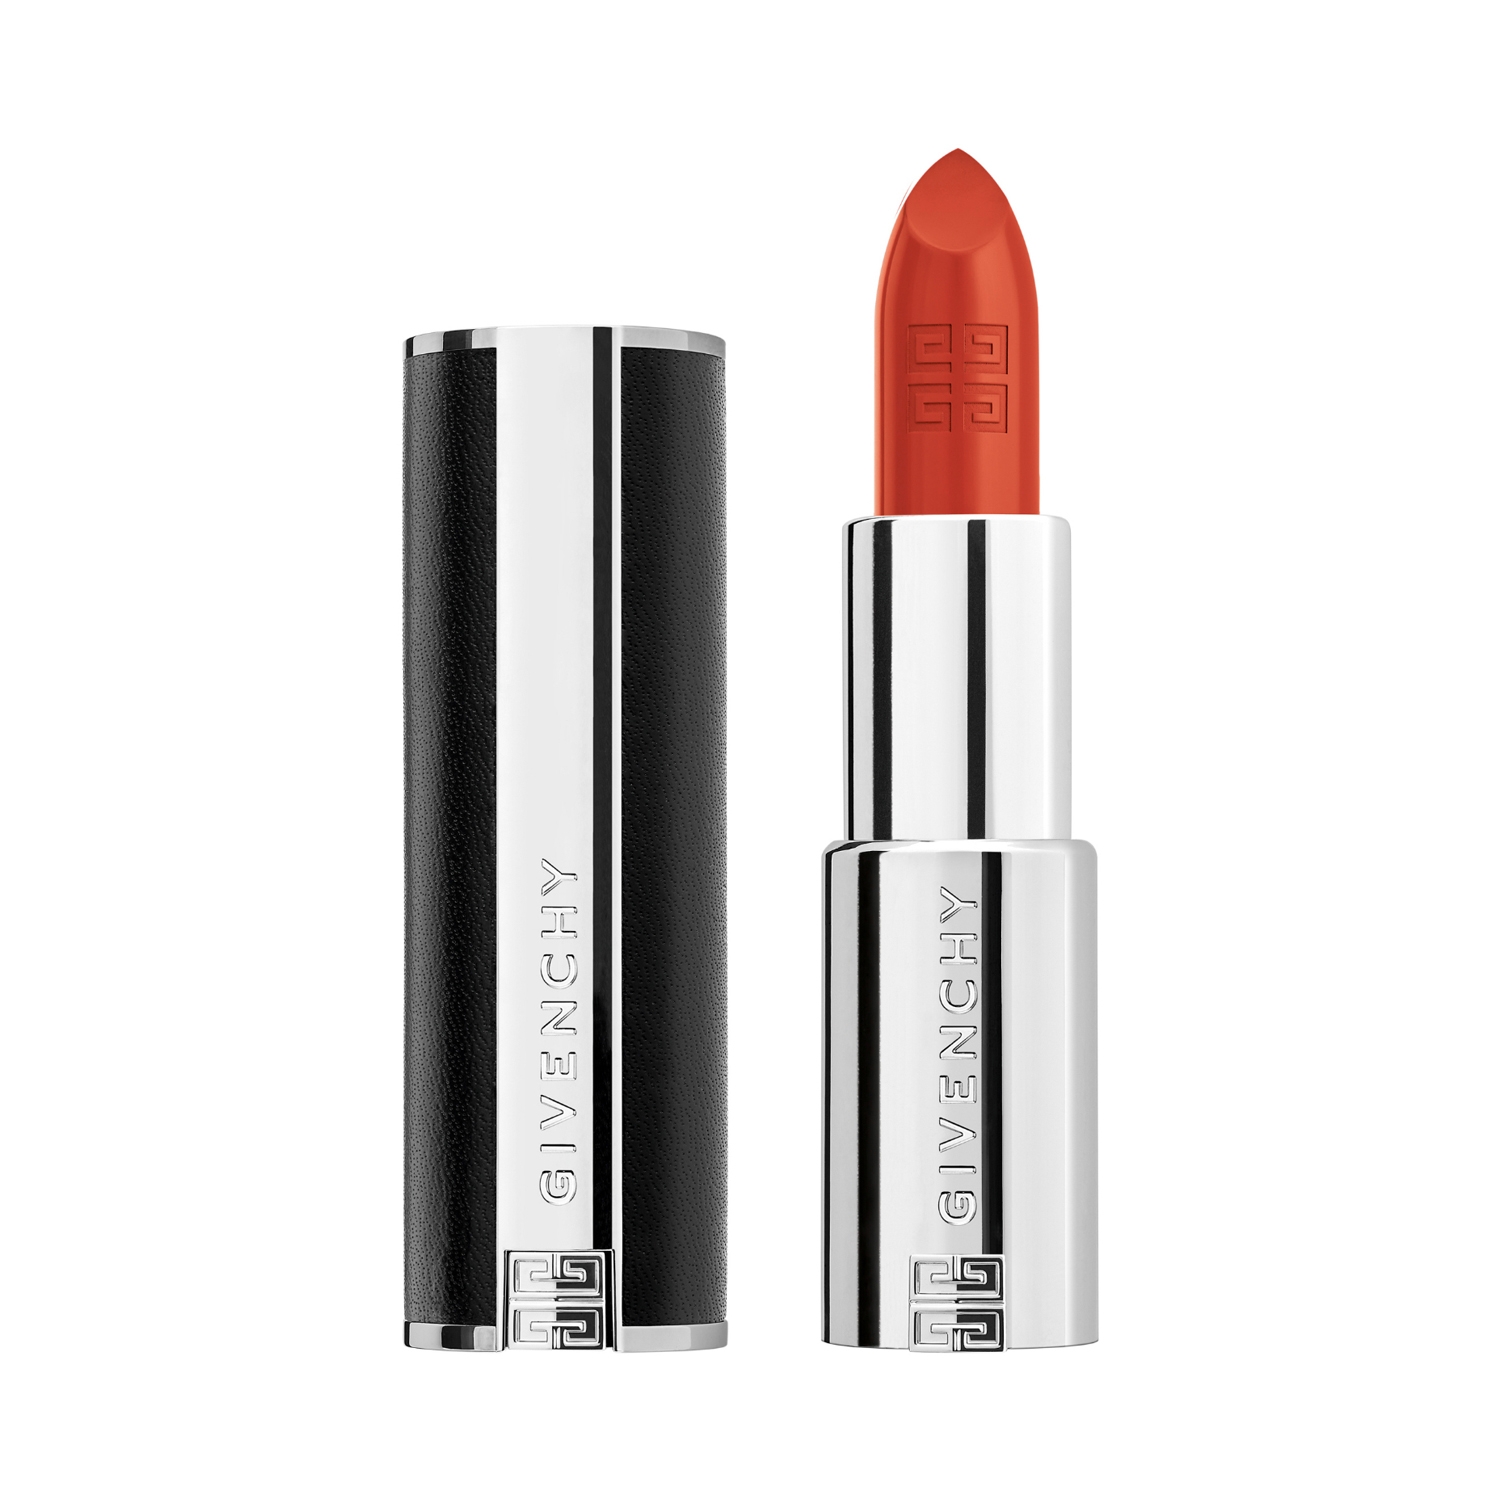 Givenchy | Givenchy Le Rouge Interdit Intense Silk Lipstick - N 332 - Rouge Safran​ (3.4g)